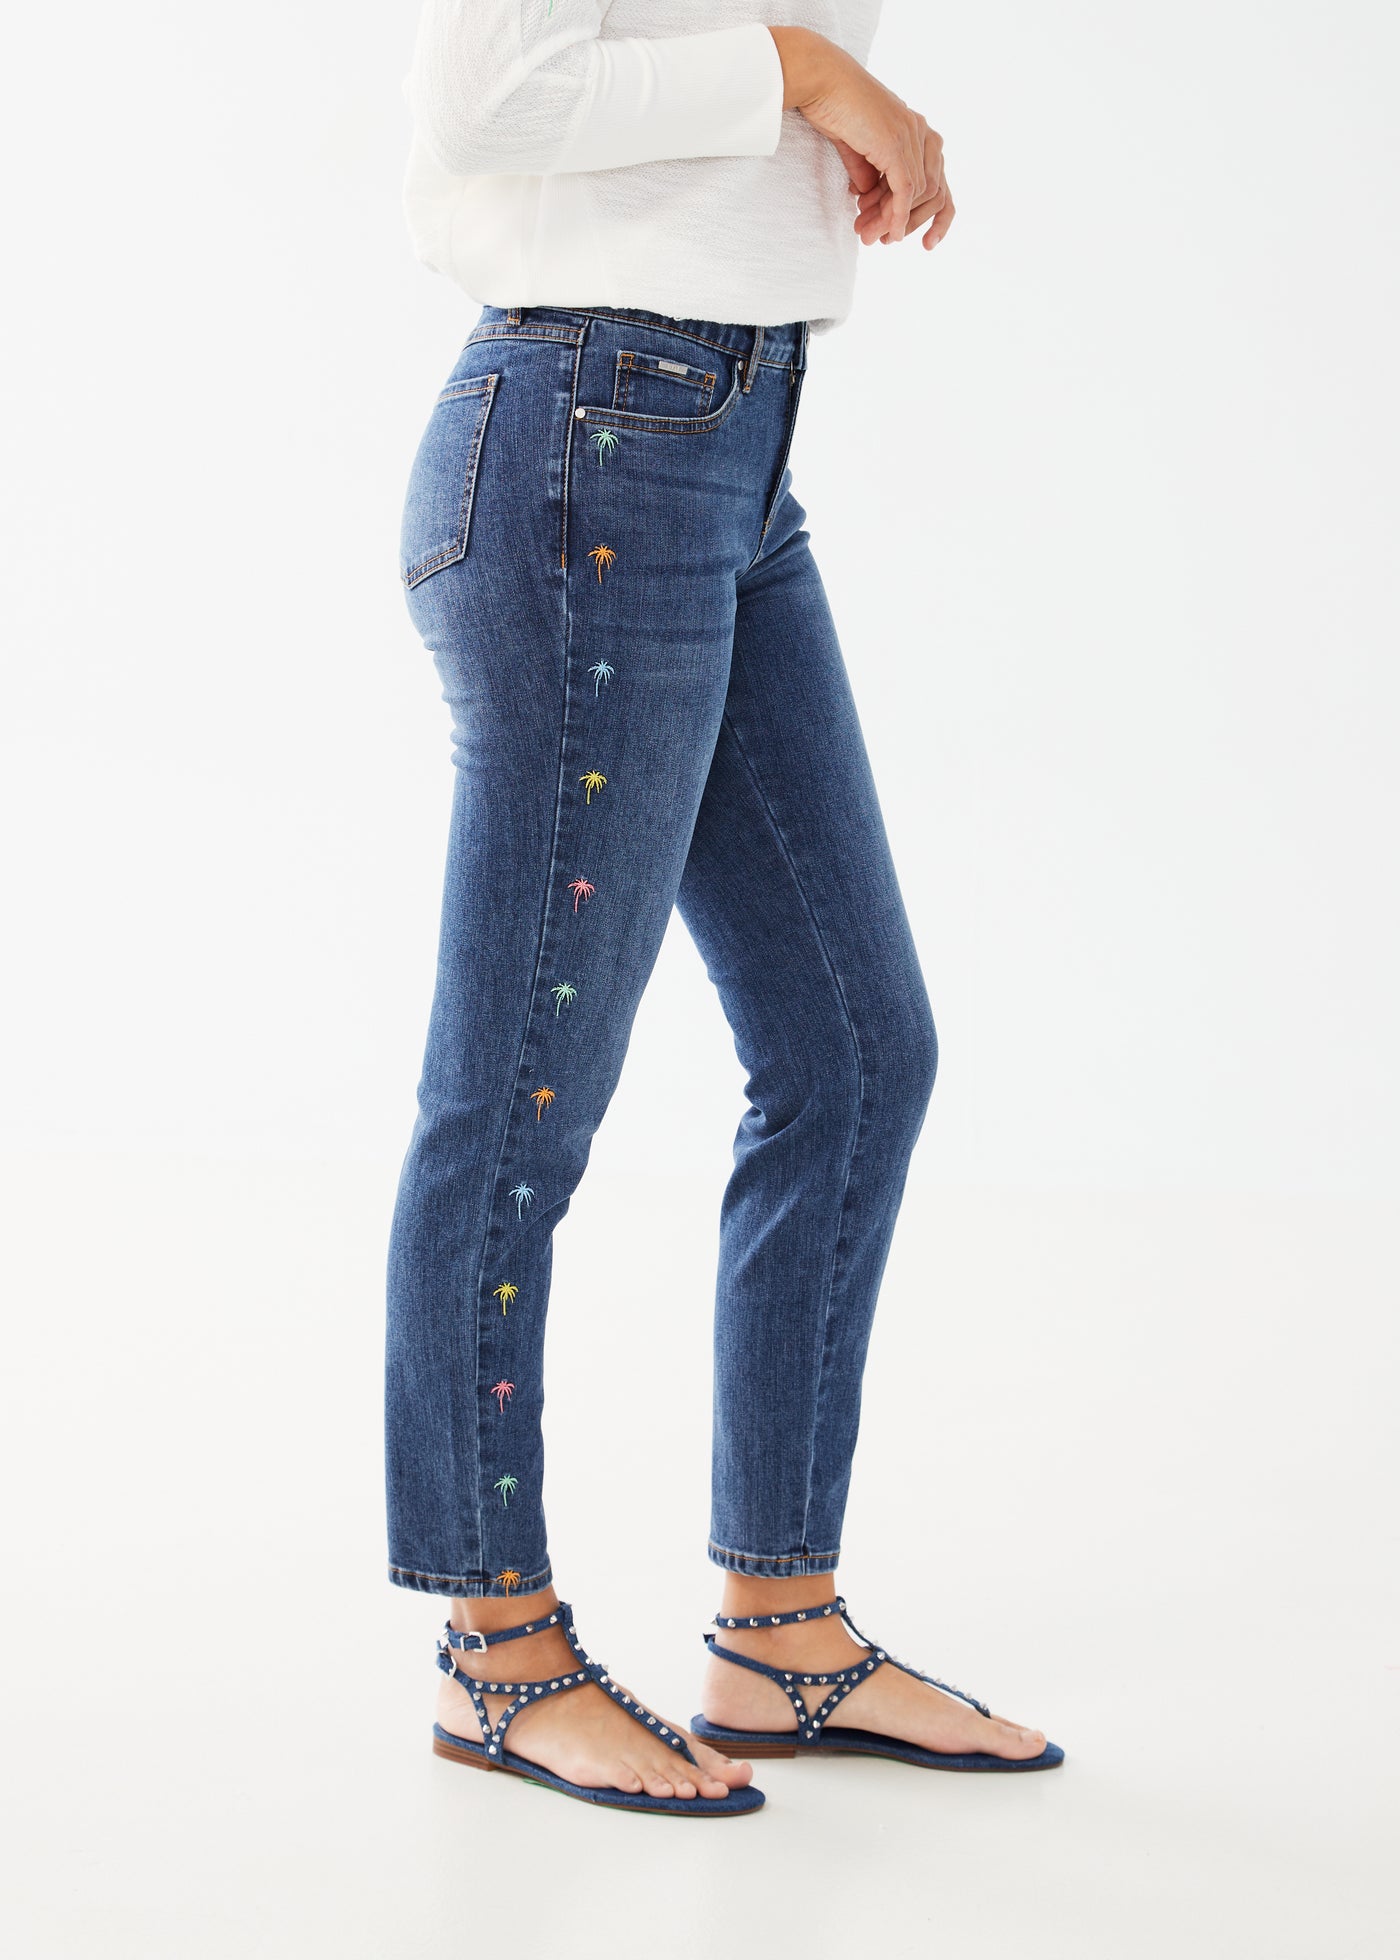 French Dressing Jeans Olivia Pencil Ankle 